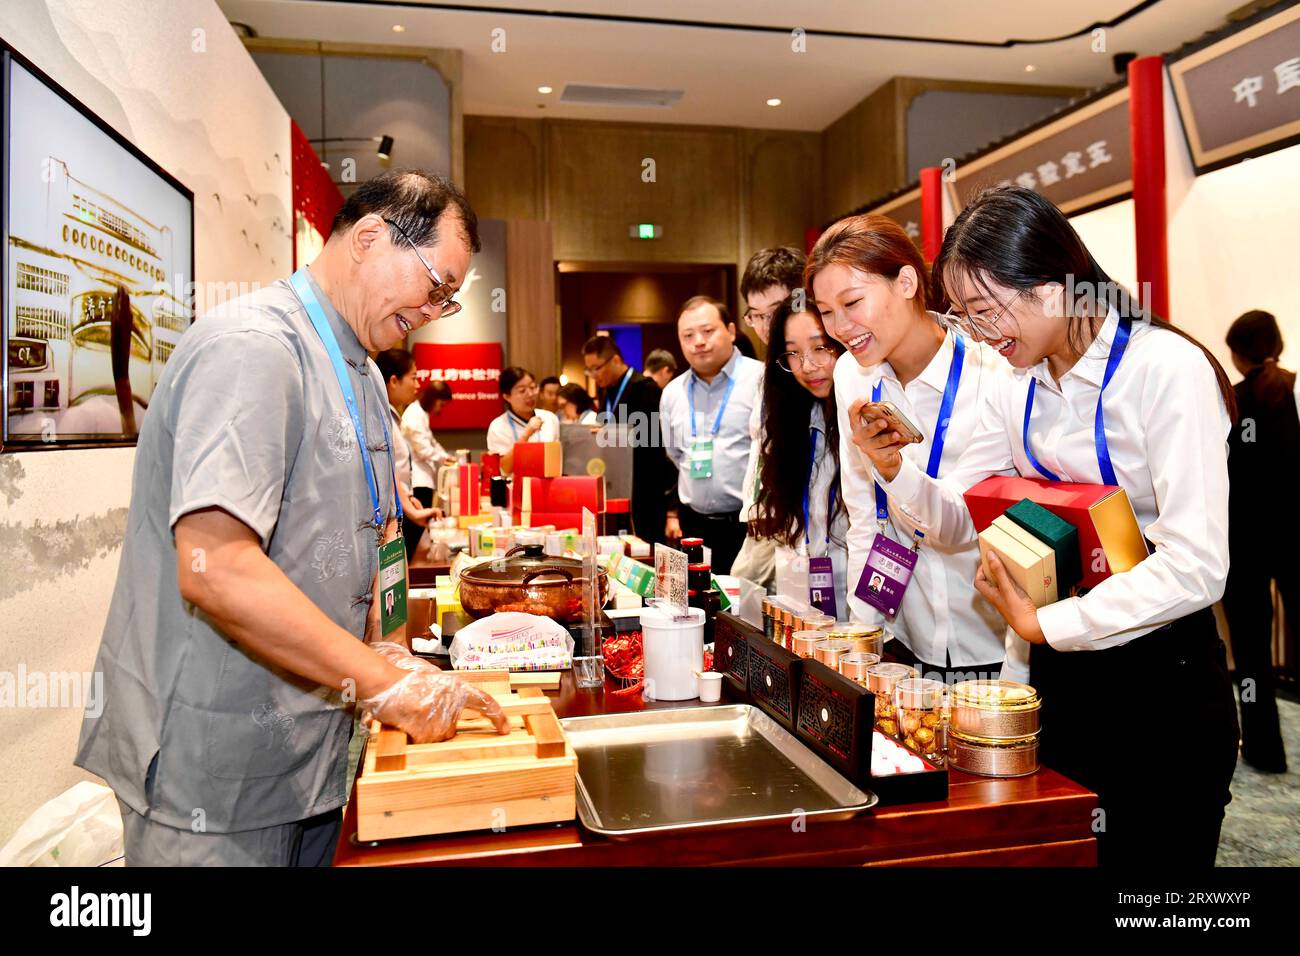 (230927) -- QUFU, Sept. 27, 2023 (Xinhua) -- A staff member from the Affiliated Hospital of Shandong University of Traditional Chinese Medicine demonstrates the making of herbal pills during the Ninth Nishan Forum on World Civilizations in Qufu, east China's Shandong Province, Sept. 27, 2023.  The forum on Confucius culture kicked off Wednesday in the city of Qufu, the birthplace of the prominent Chinese philosopher.   The Nishan Forum on World Civilizations, the ninth since its inception in 2010, has attracted 330 foreign guests, including politicians, representatives from international organ Stock Photo